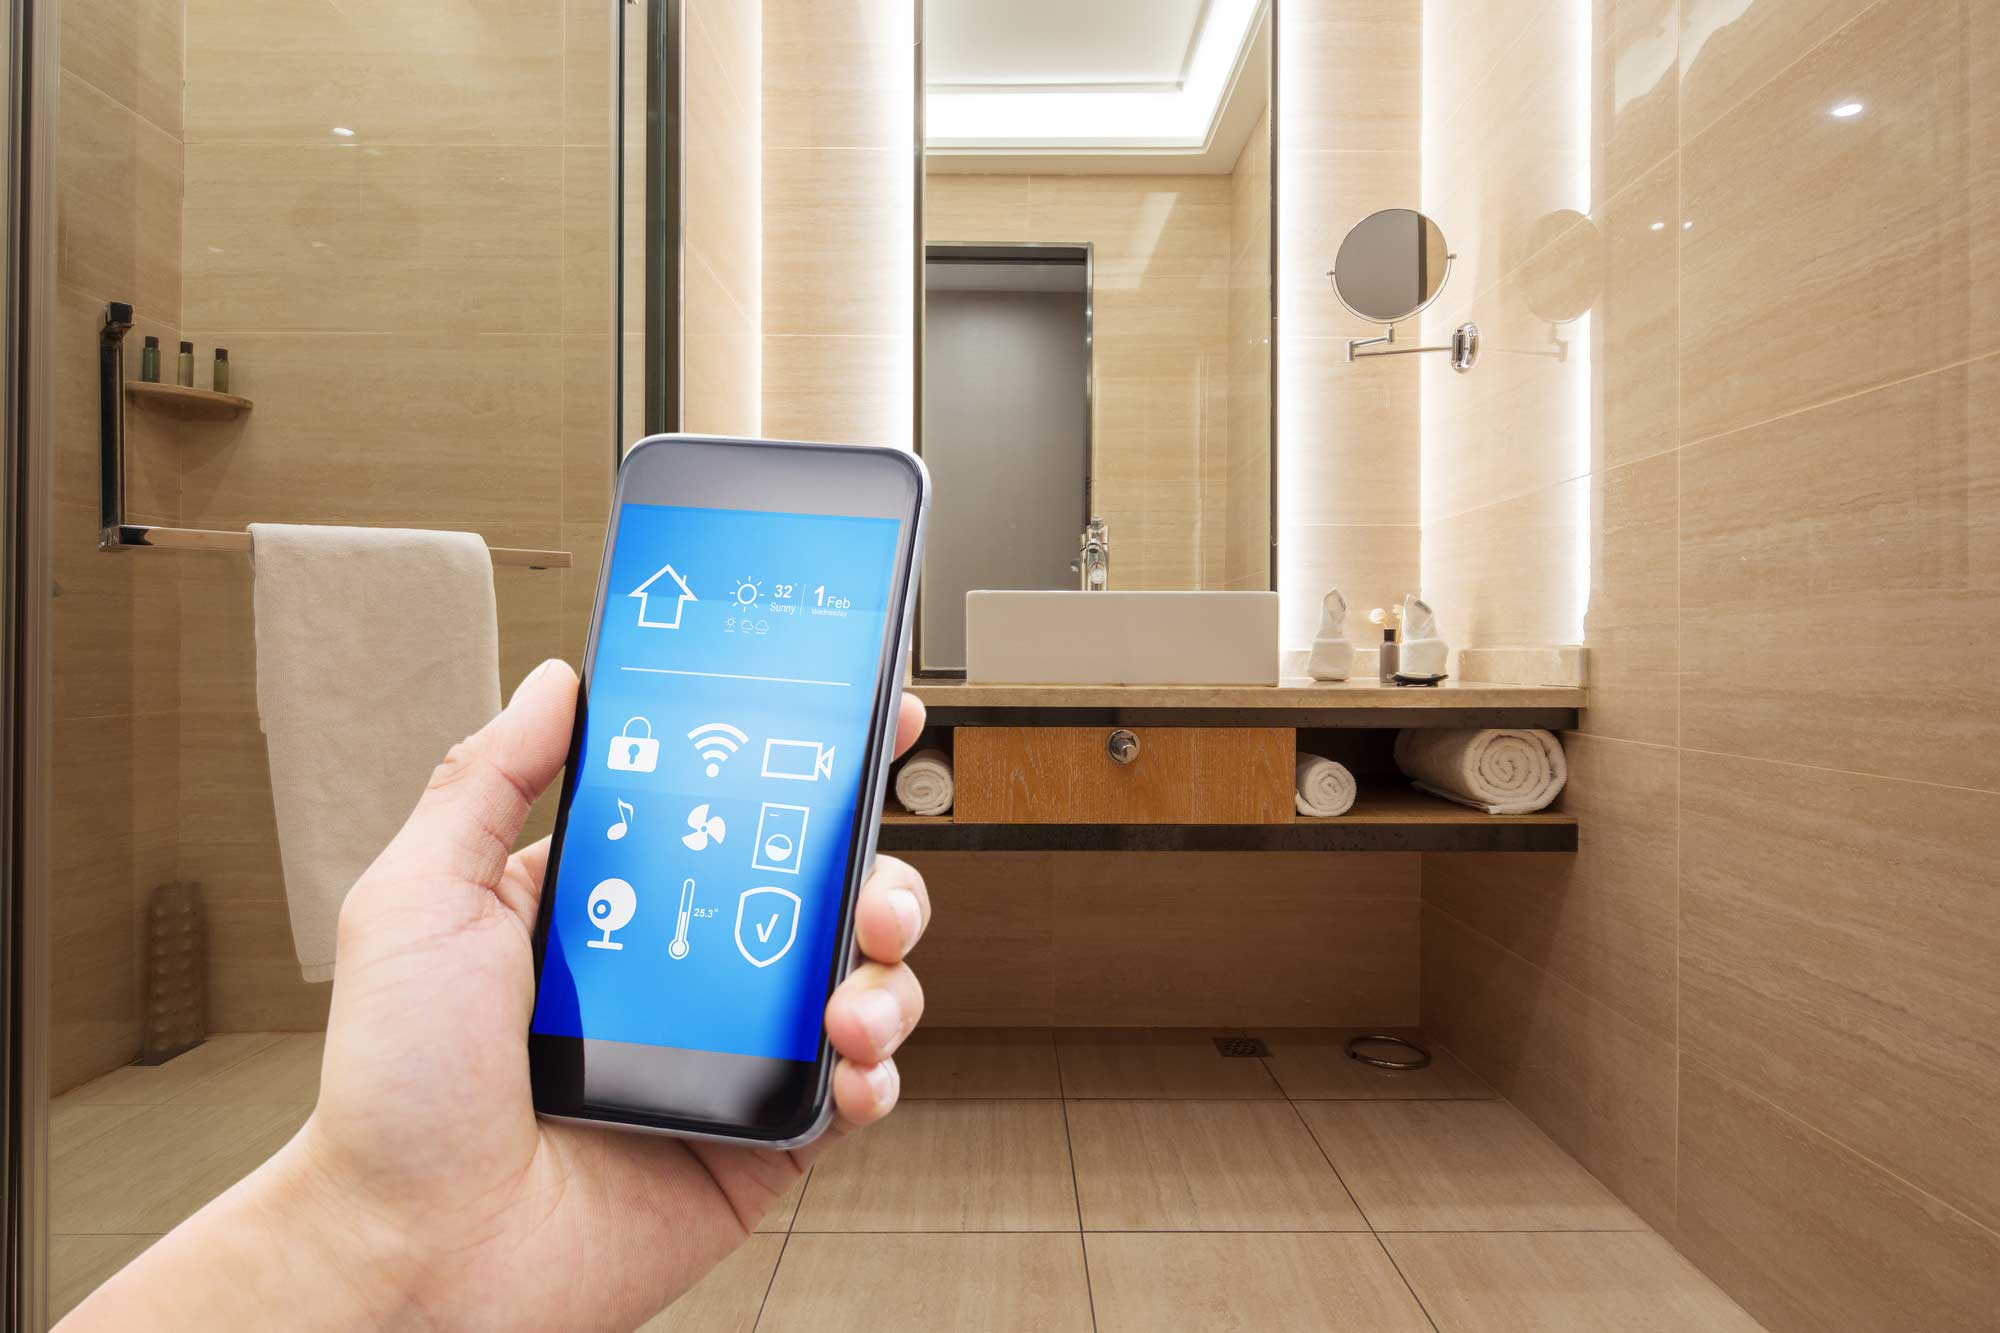 Smartphone with smart home and modern bathroom